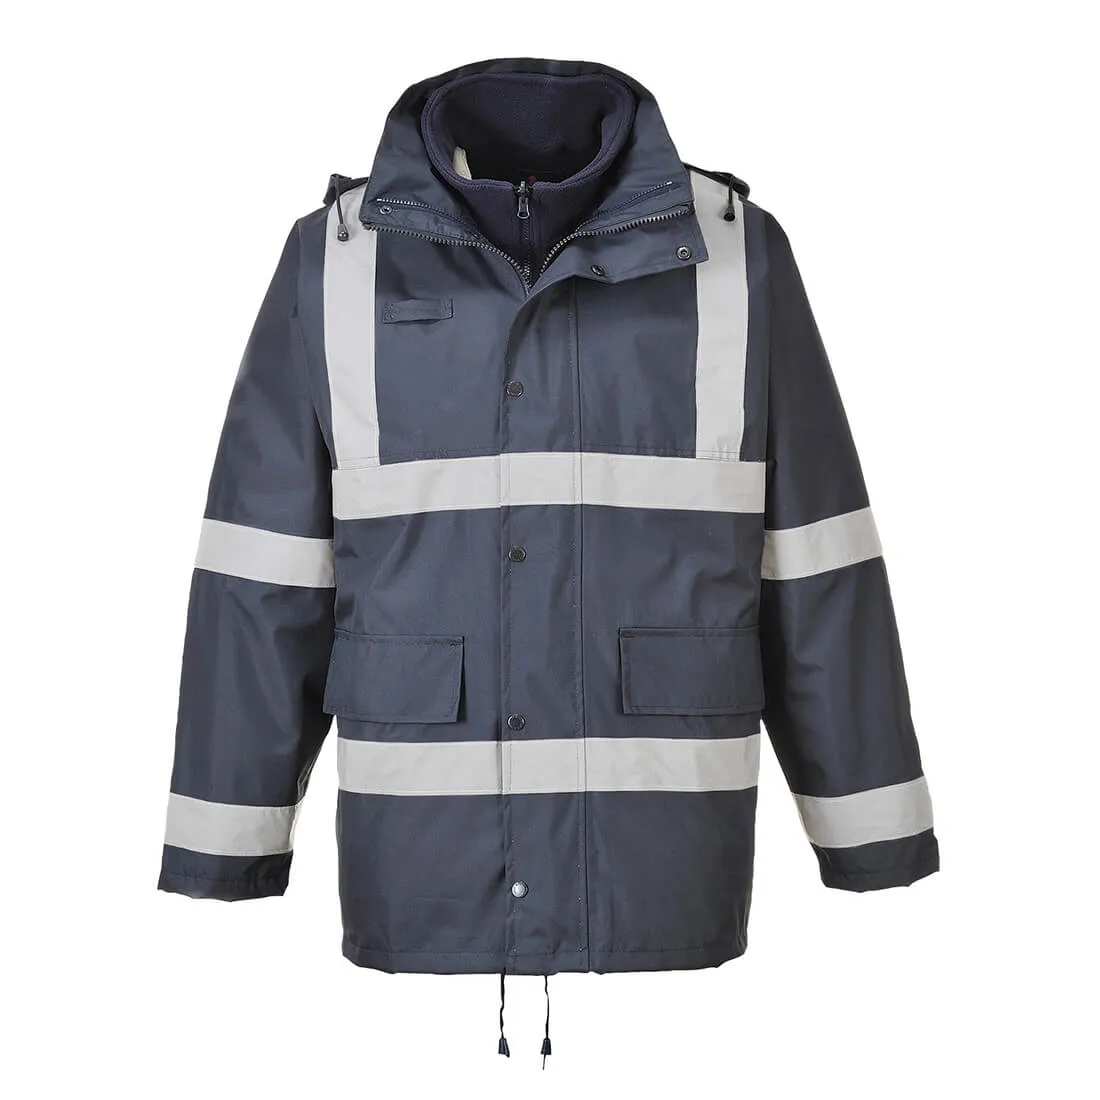 Portwest S431 Iona 3in1 Traffic Jacket - Navy, 2XL